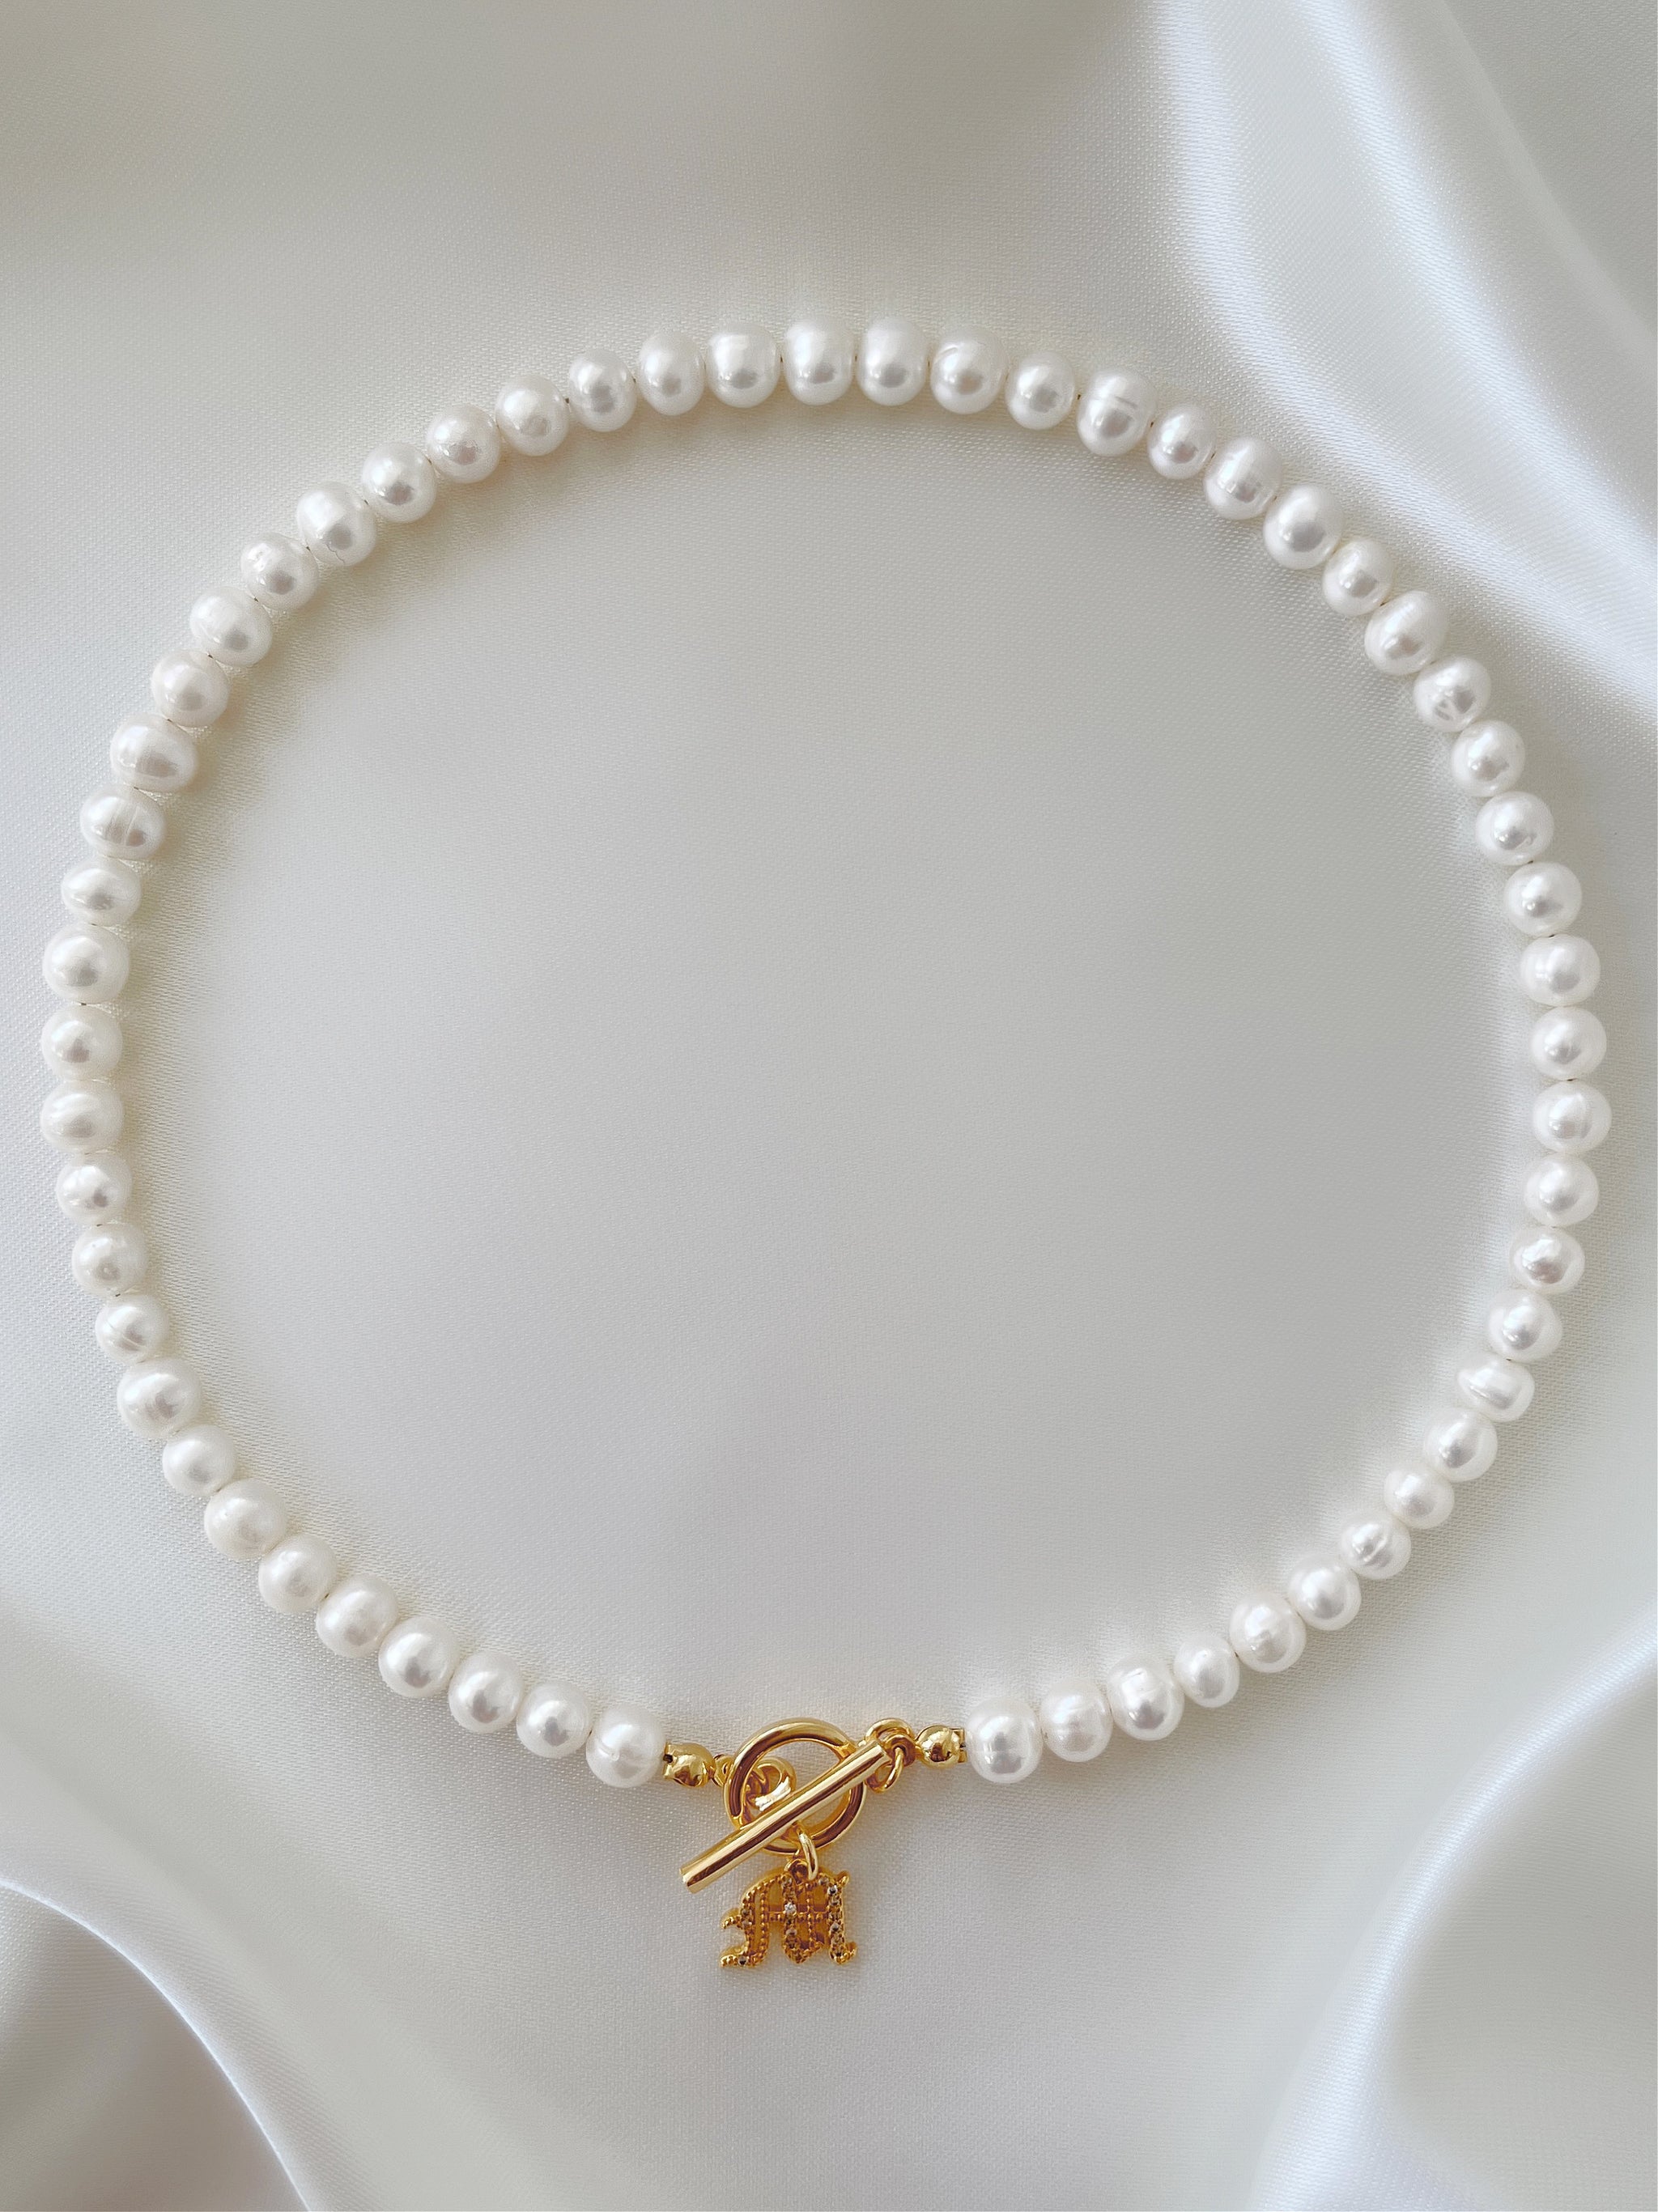 Personalized monogram charm bracelet with white pearls and toggle clasp.